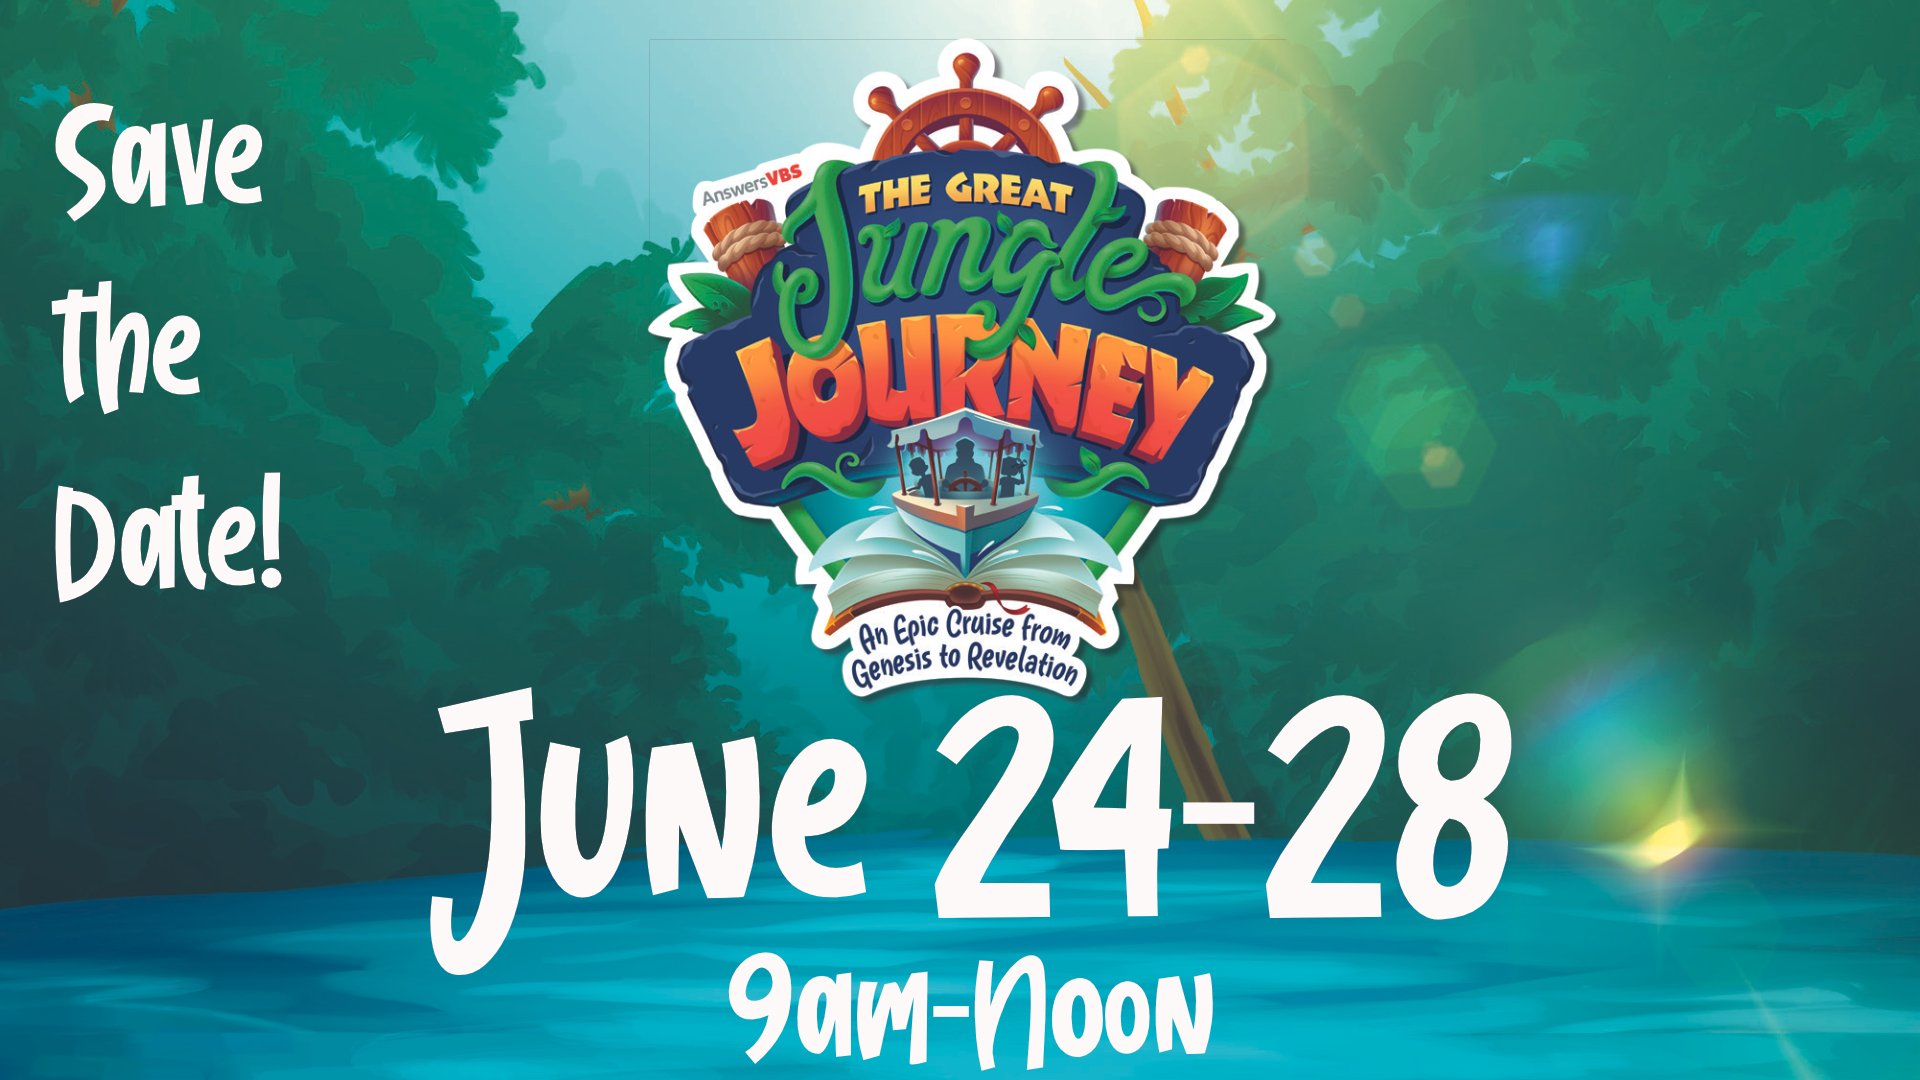 save the date slide vbs.jpg